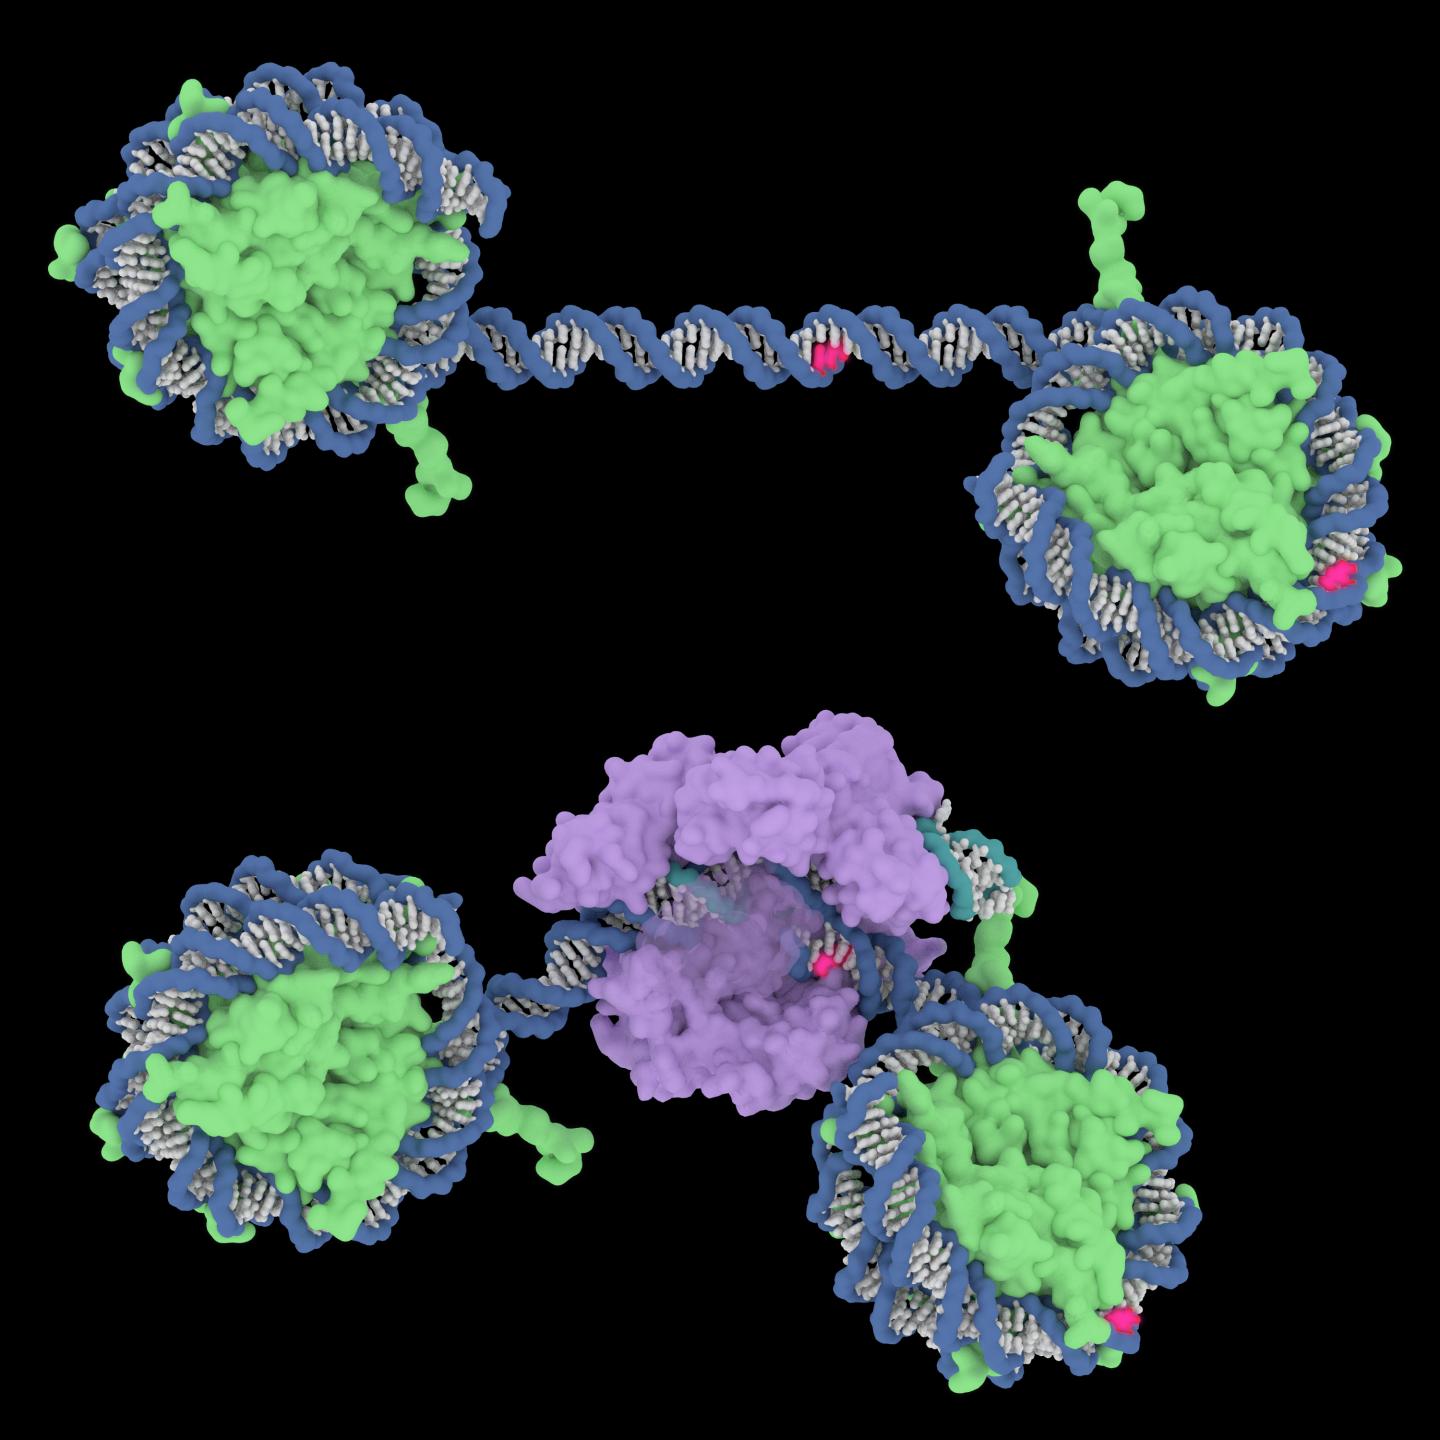 Illustration of Cas9 binding to DNA